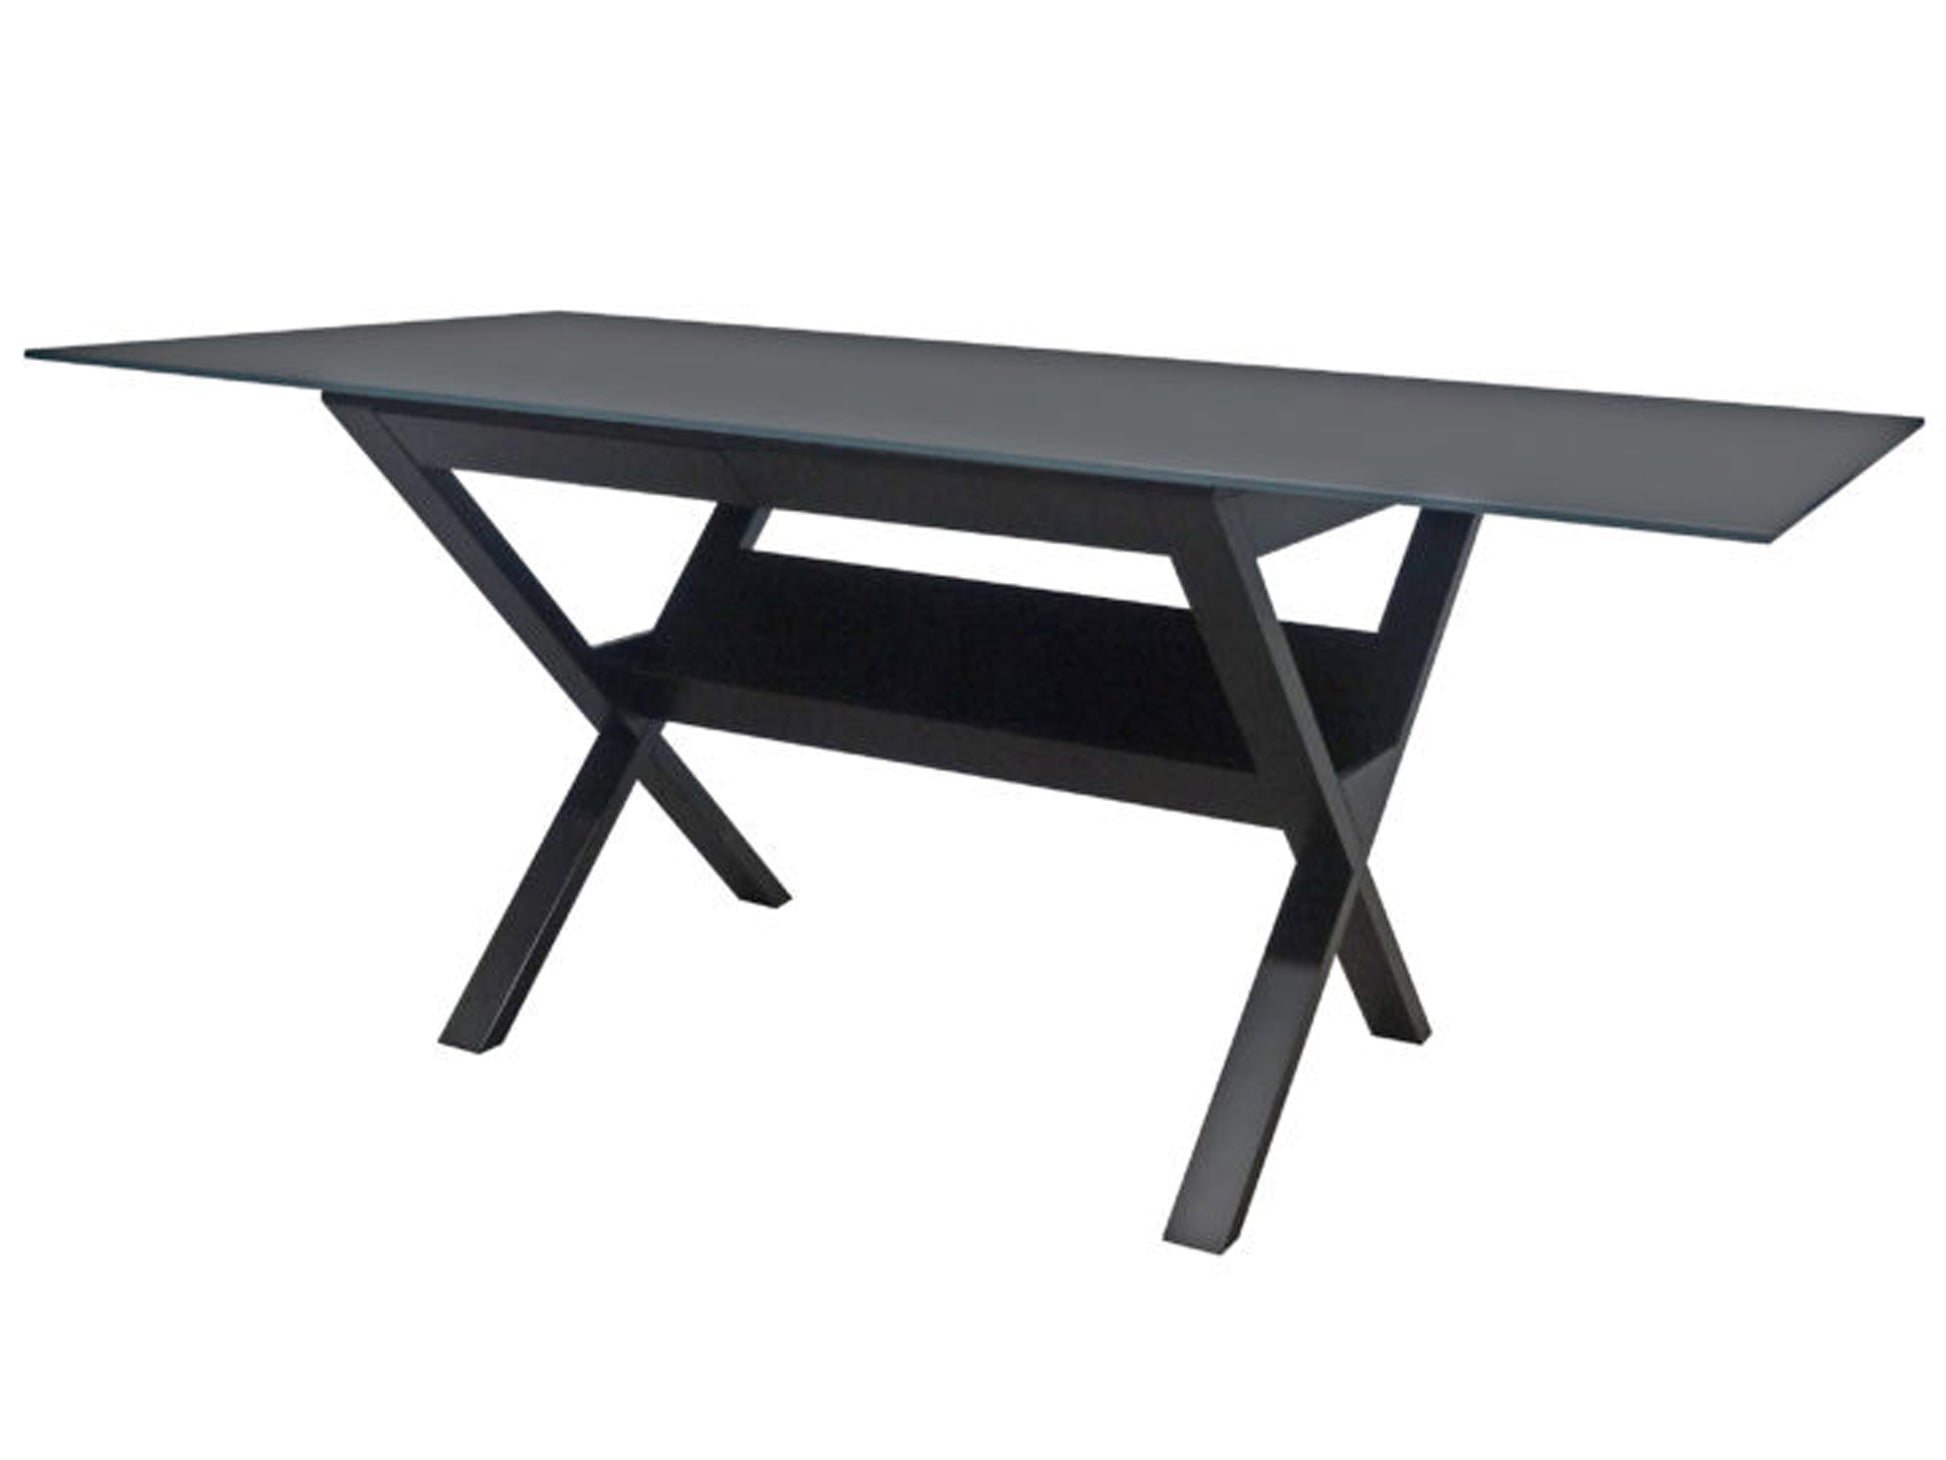 Muse Paris Desk, this solid wood, locally built desk can double as a condo dining table